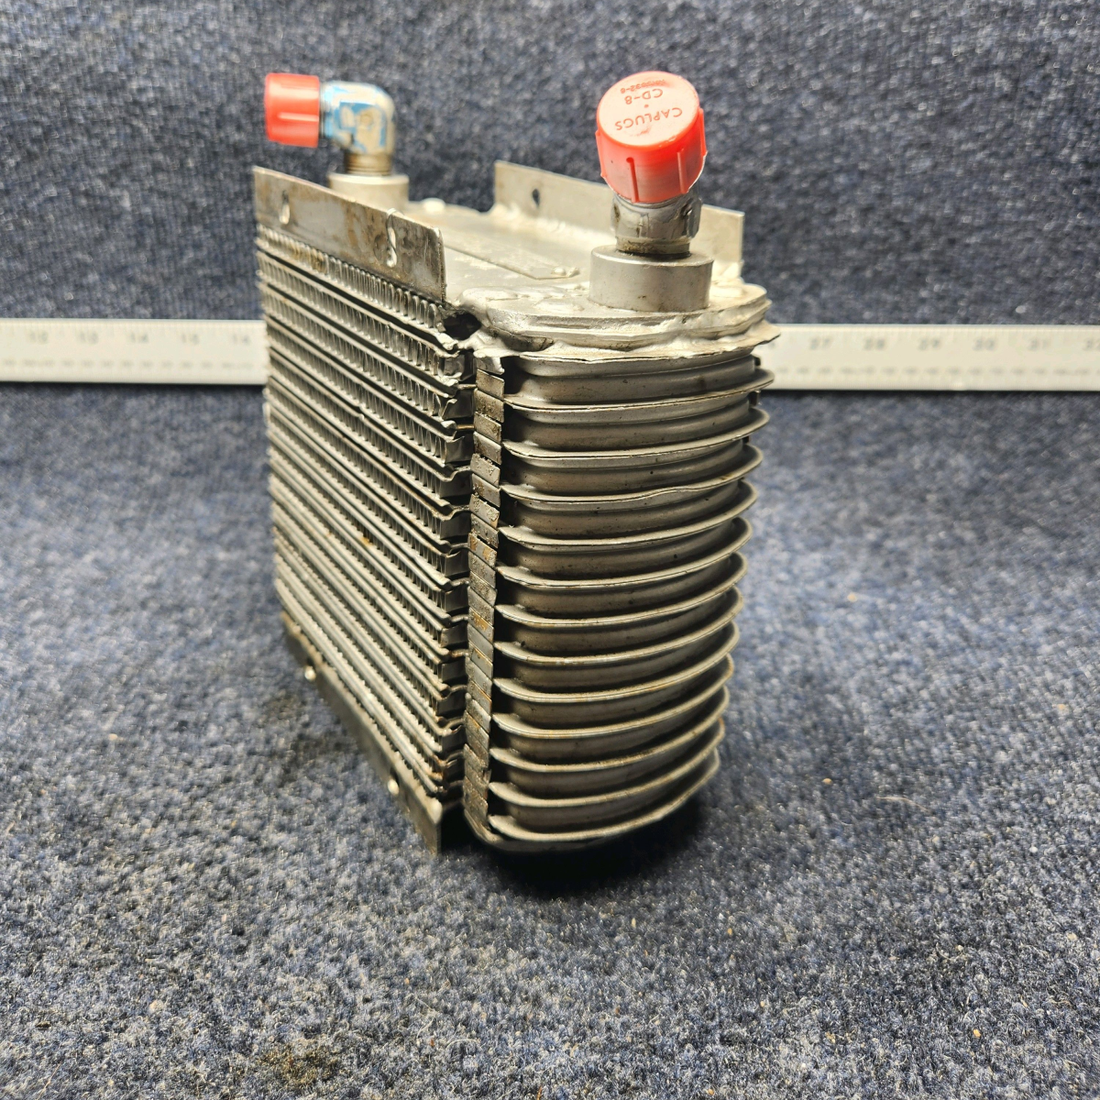 Used aircraft parts for sale, 8544108 Lycoming Textron OIL COOLER ASSEMBLY "SEE PHOTOS"